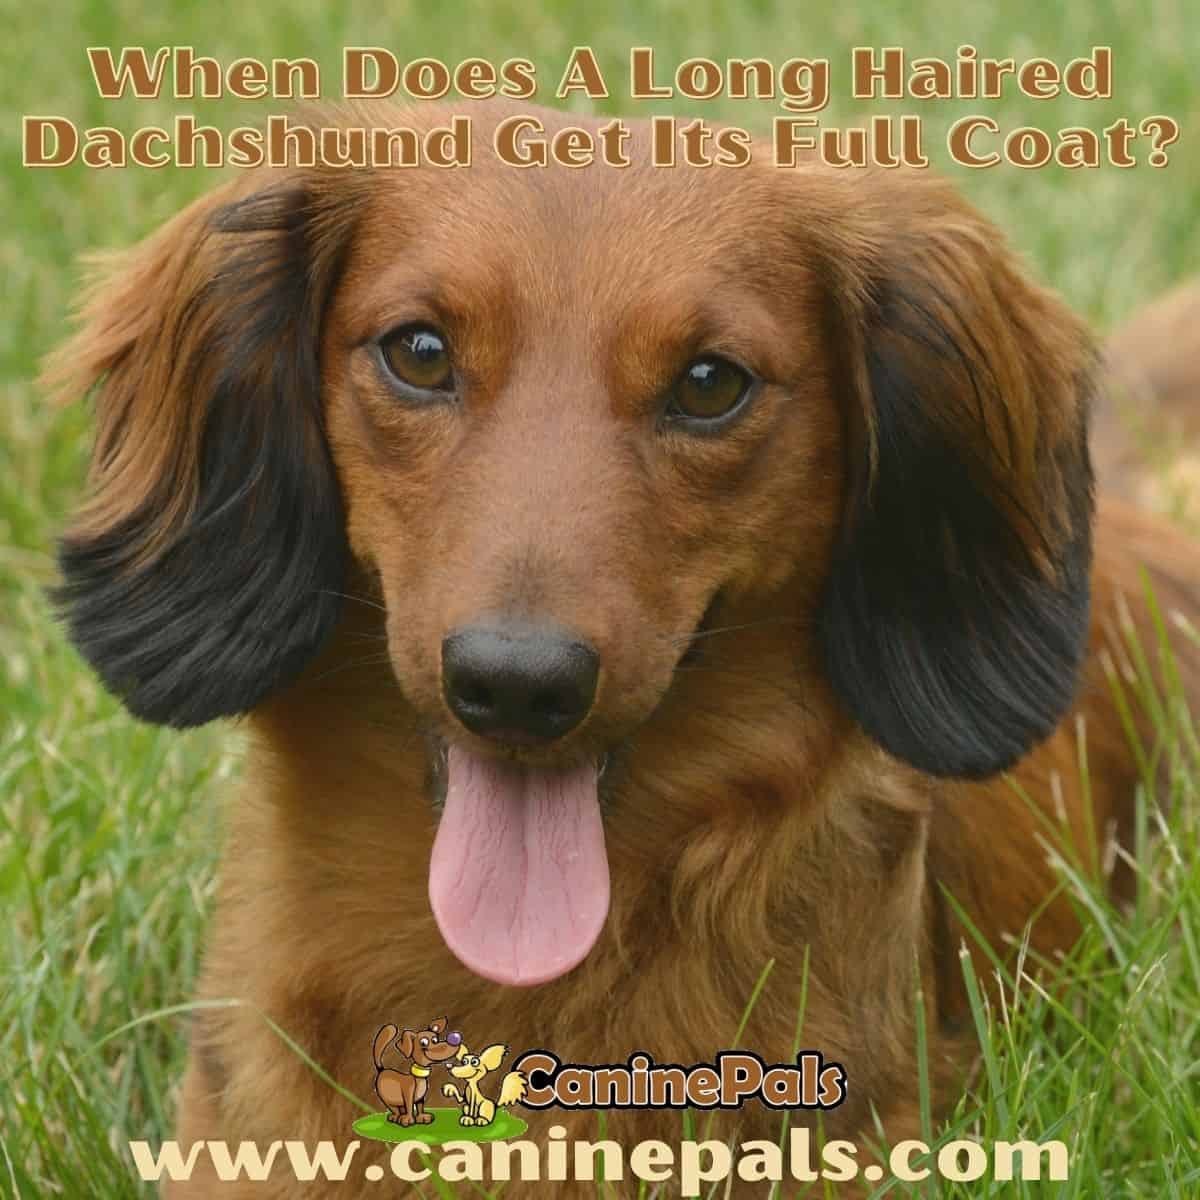 When does a long-haired dachshund get its full coat?